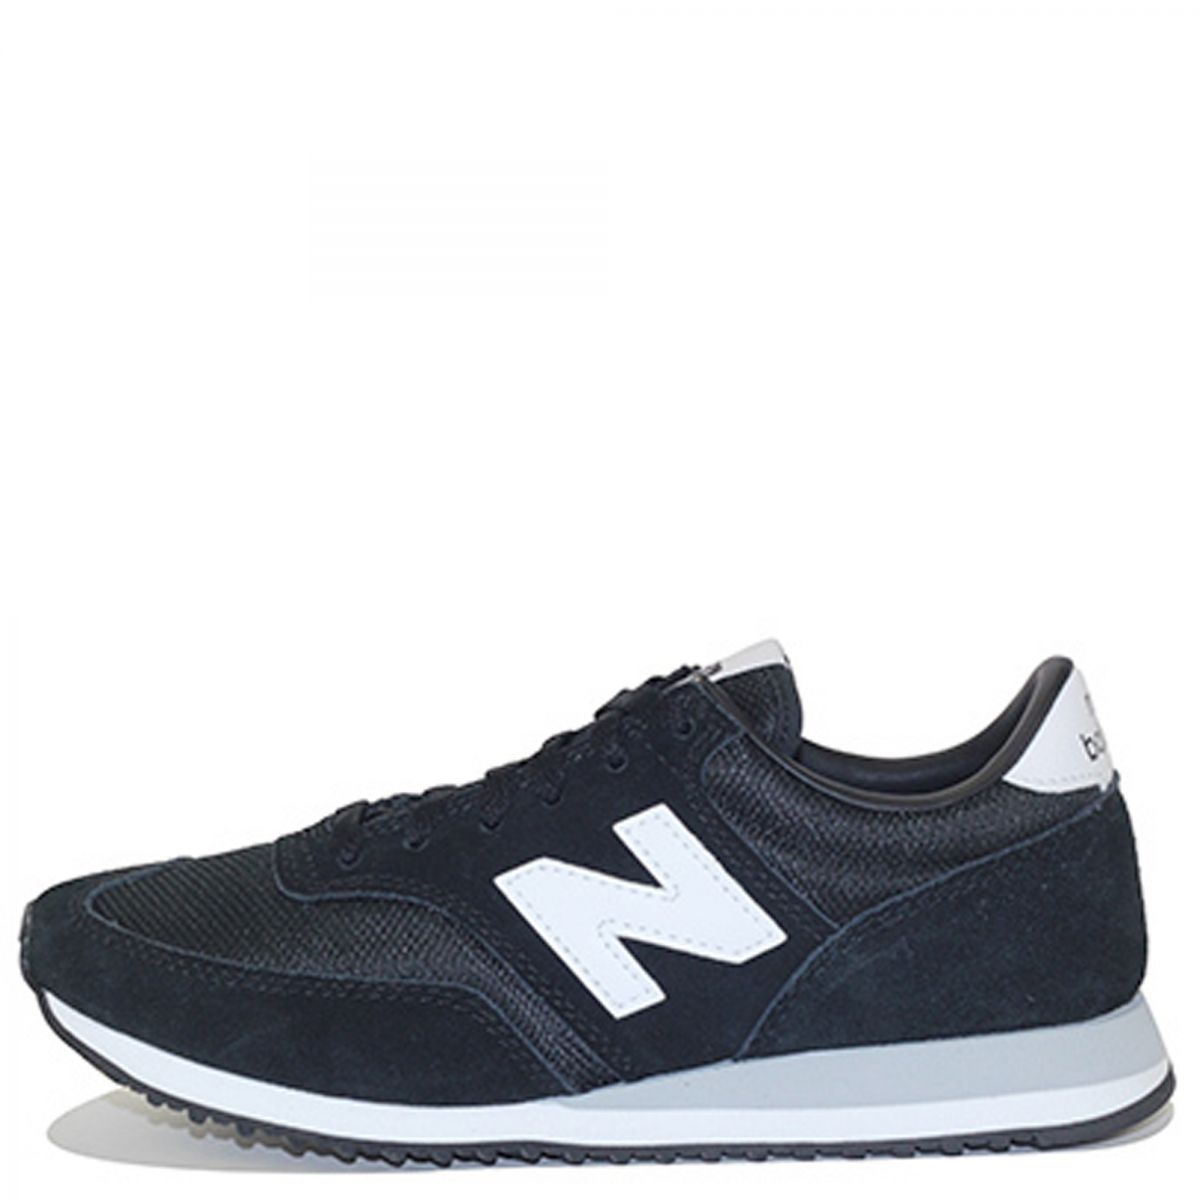 new balance 620 review